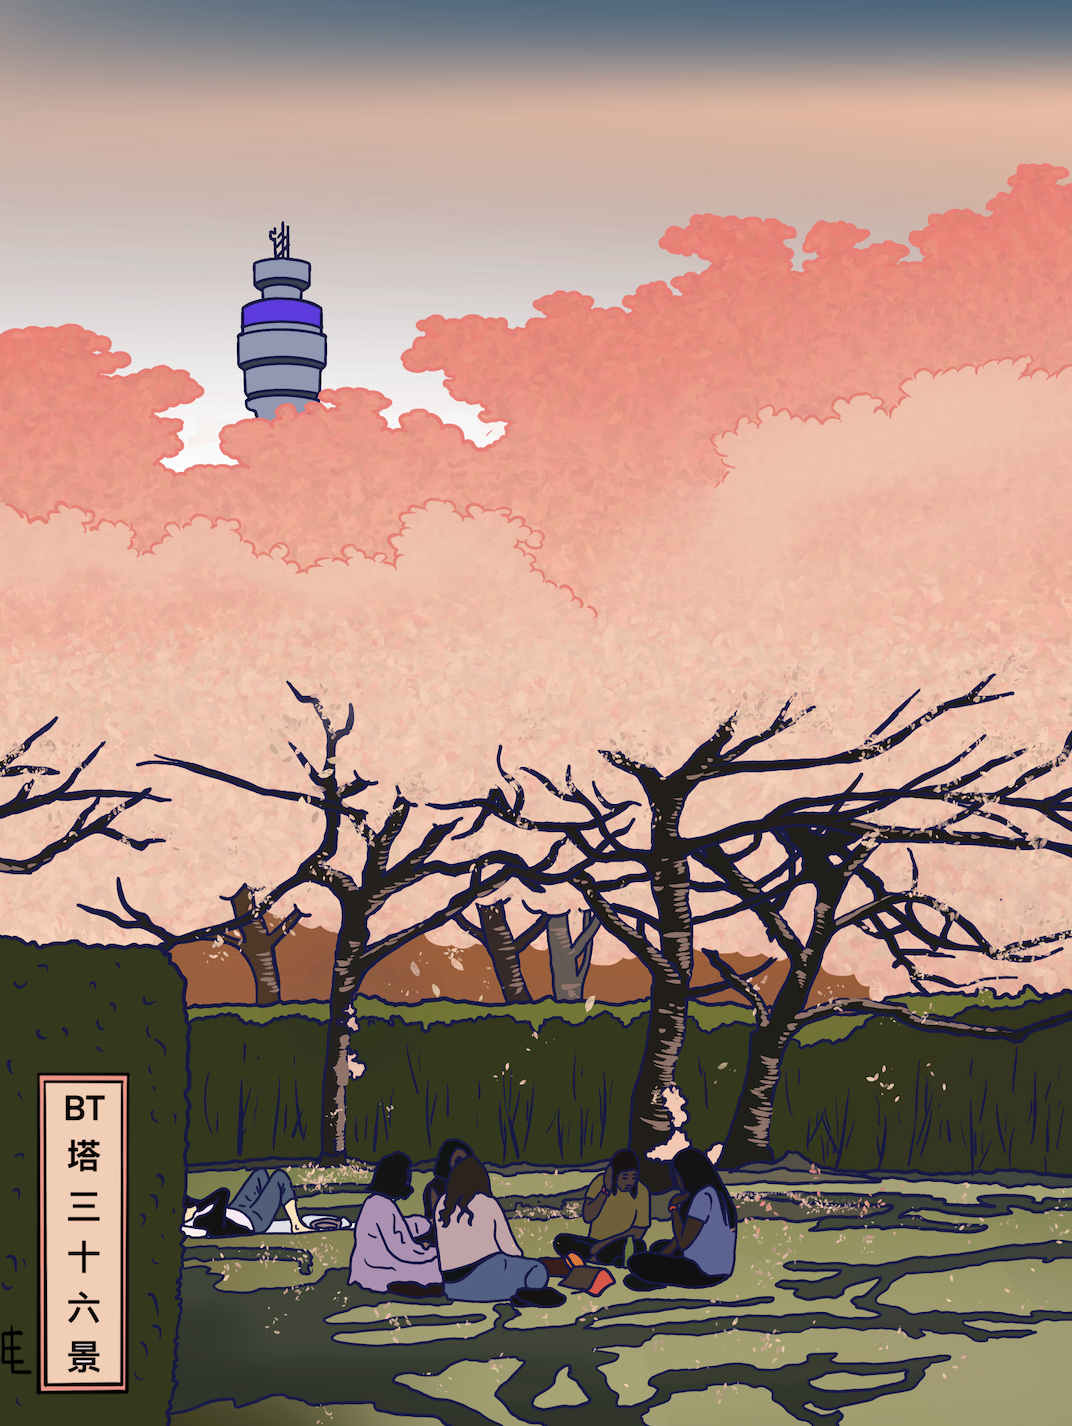 ‘Hanami In Regents Park’: BT Tower Above The Cherry Blossoms